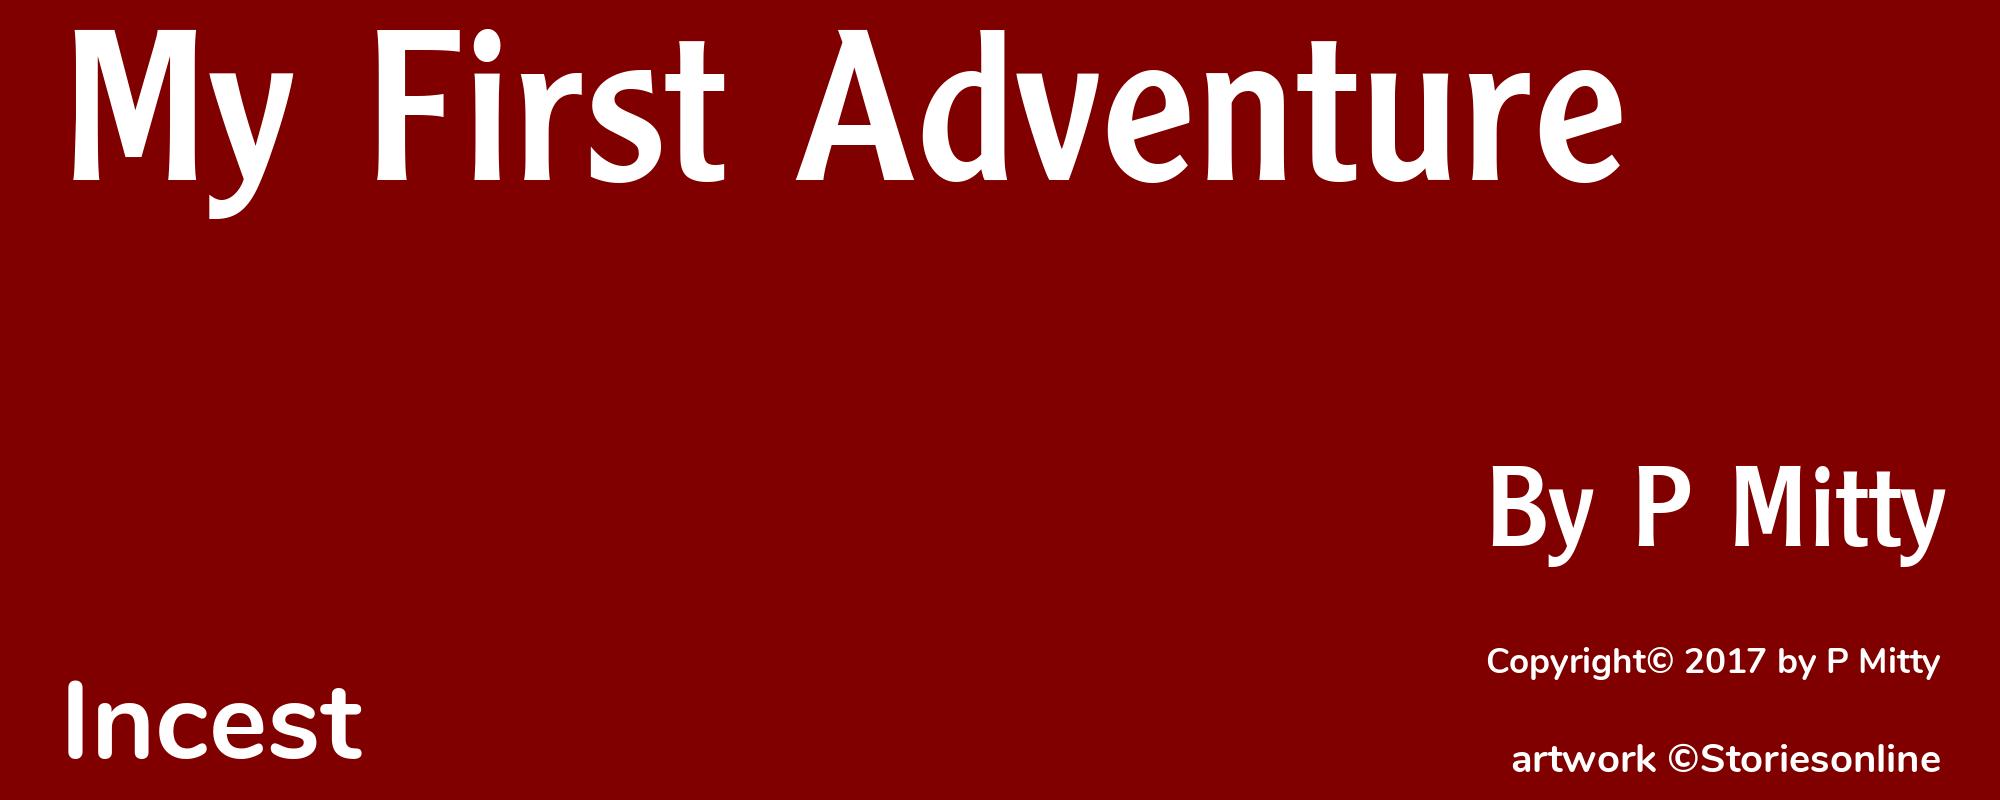 My First Adventure - Cover